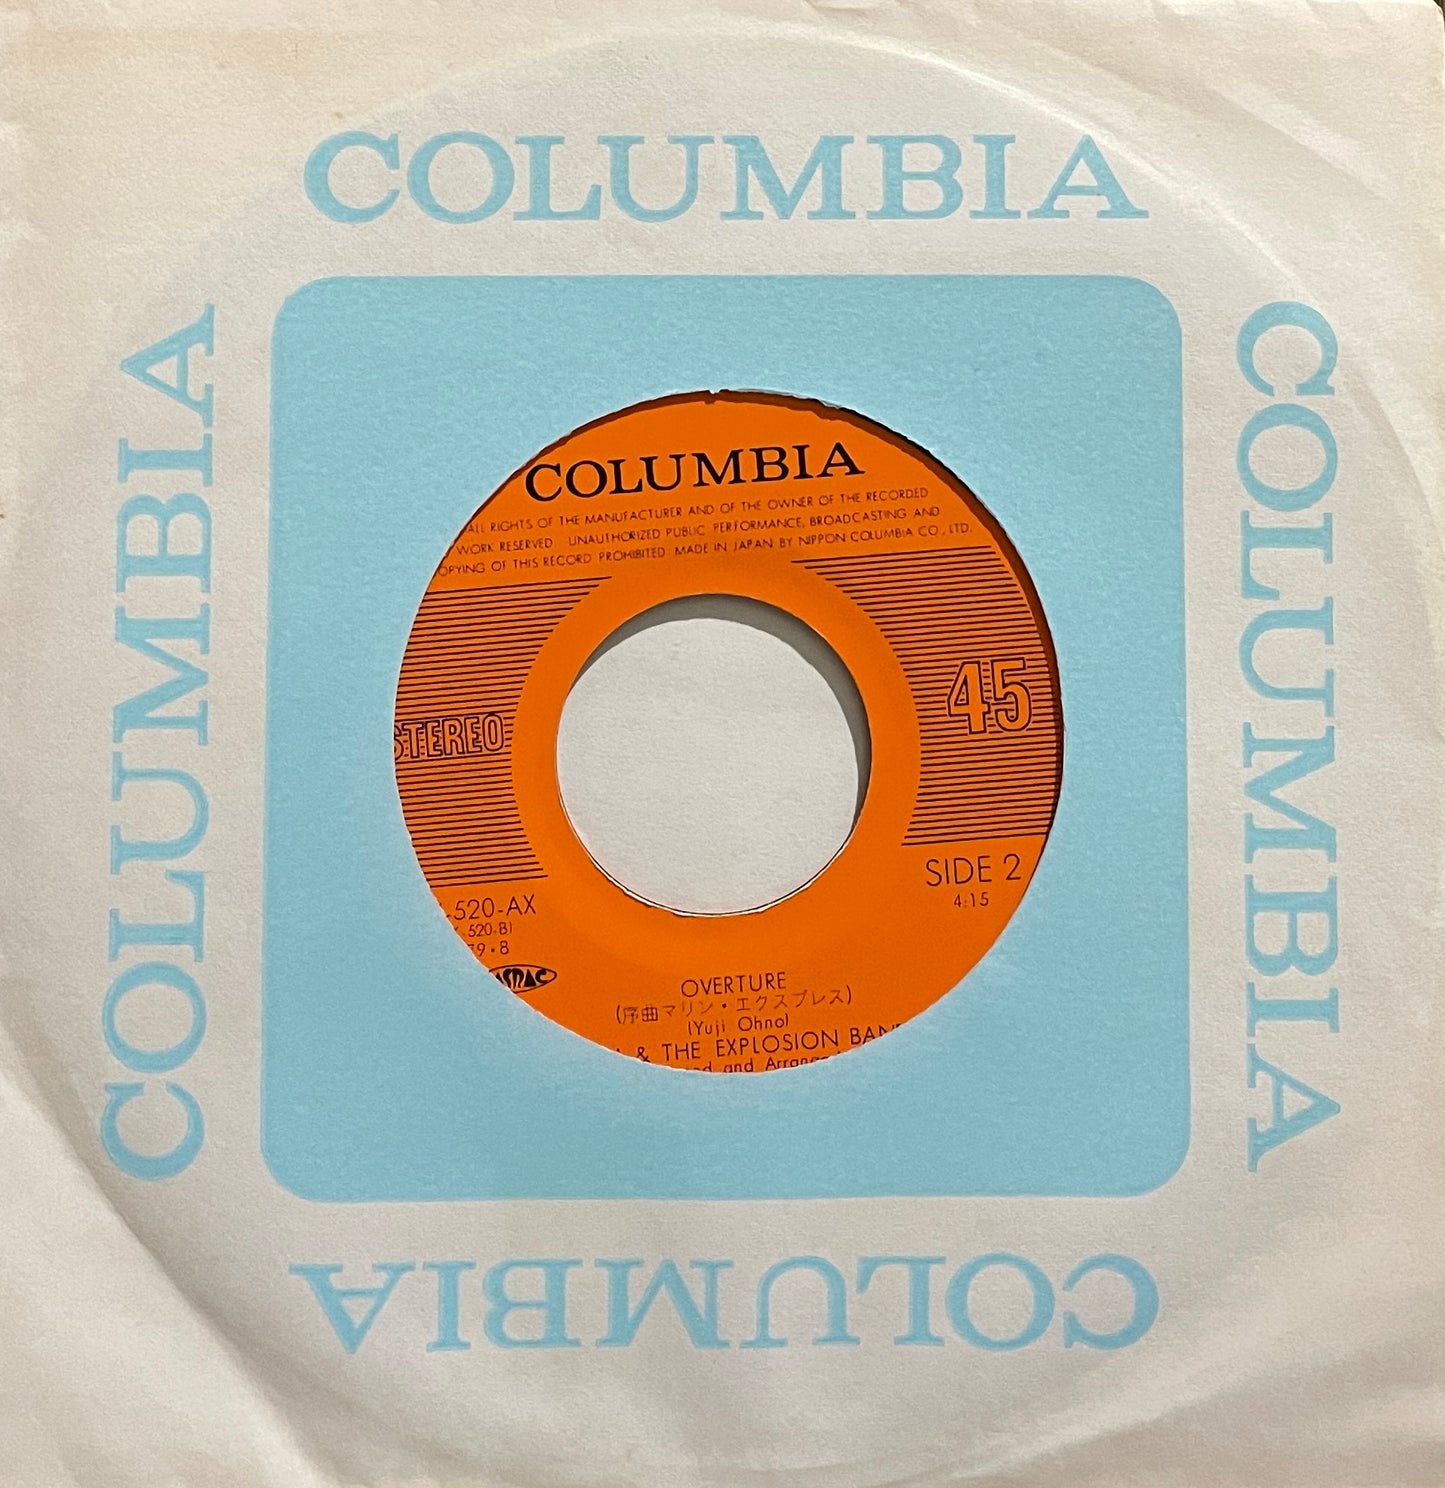 Tommy Snyder / You & The Explosion Band "The Marine Express" 45 (1979)